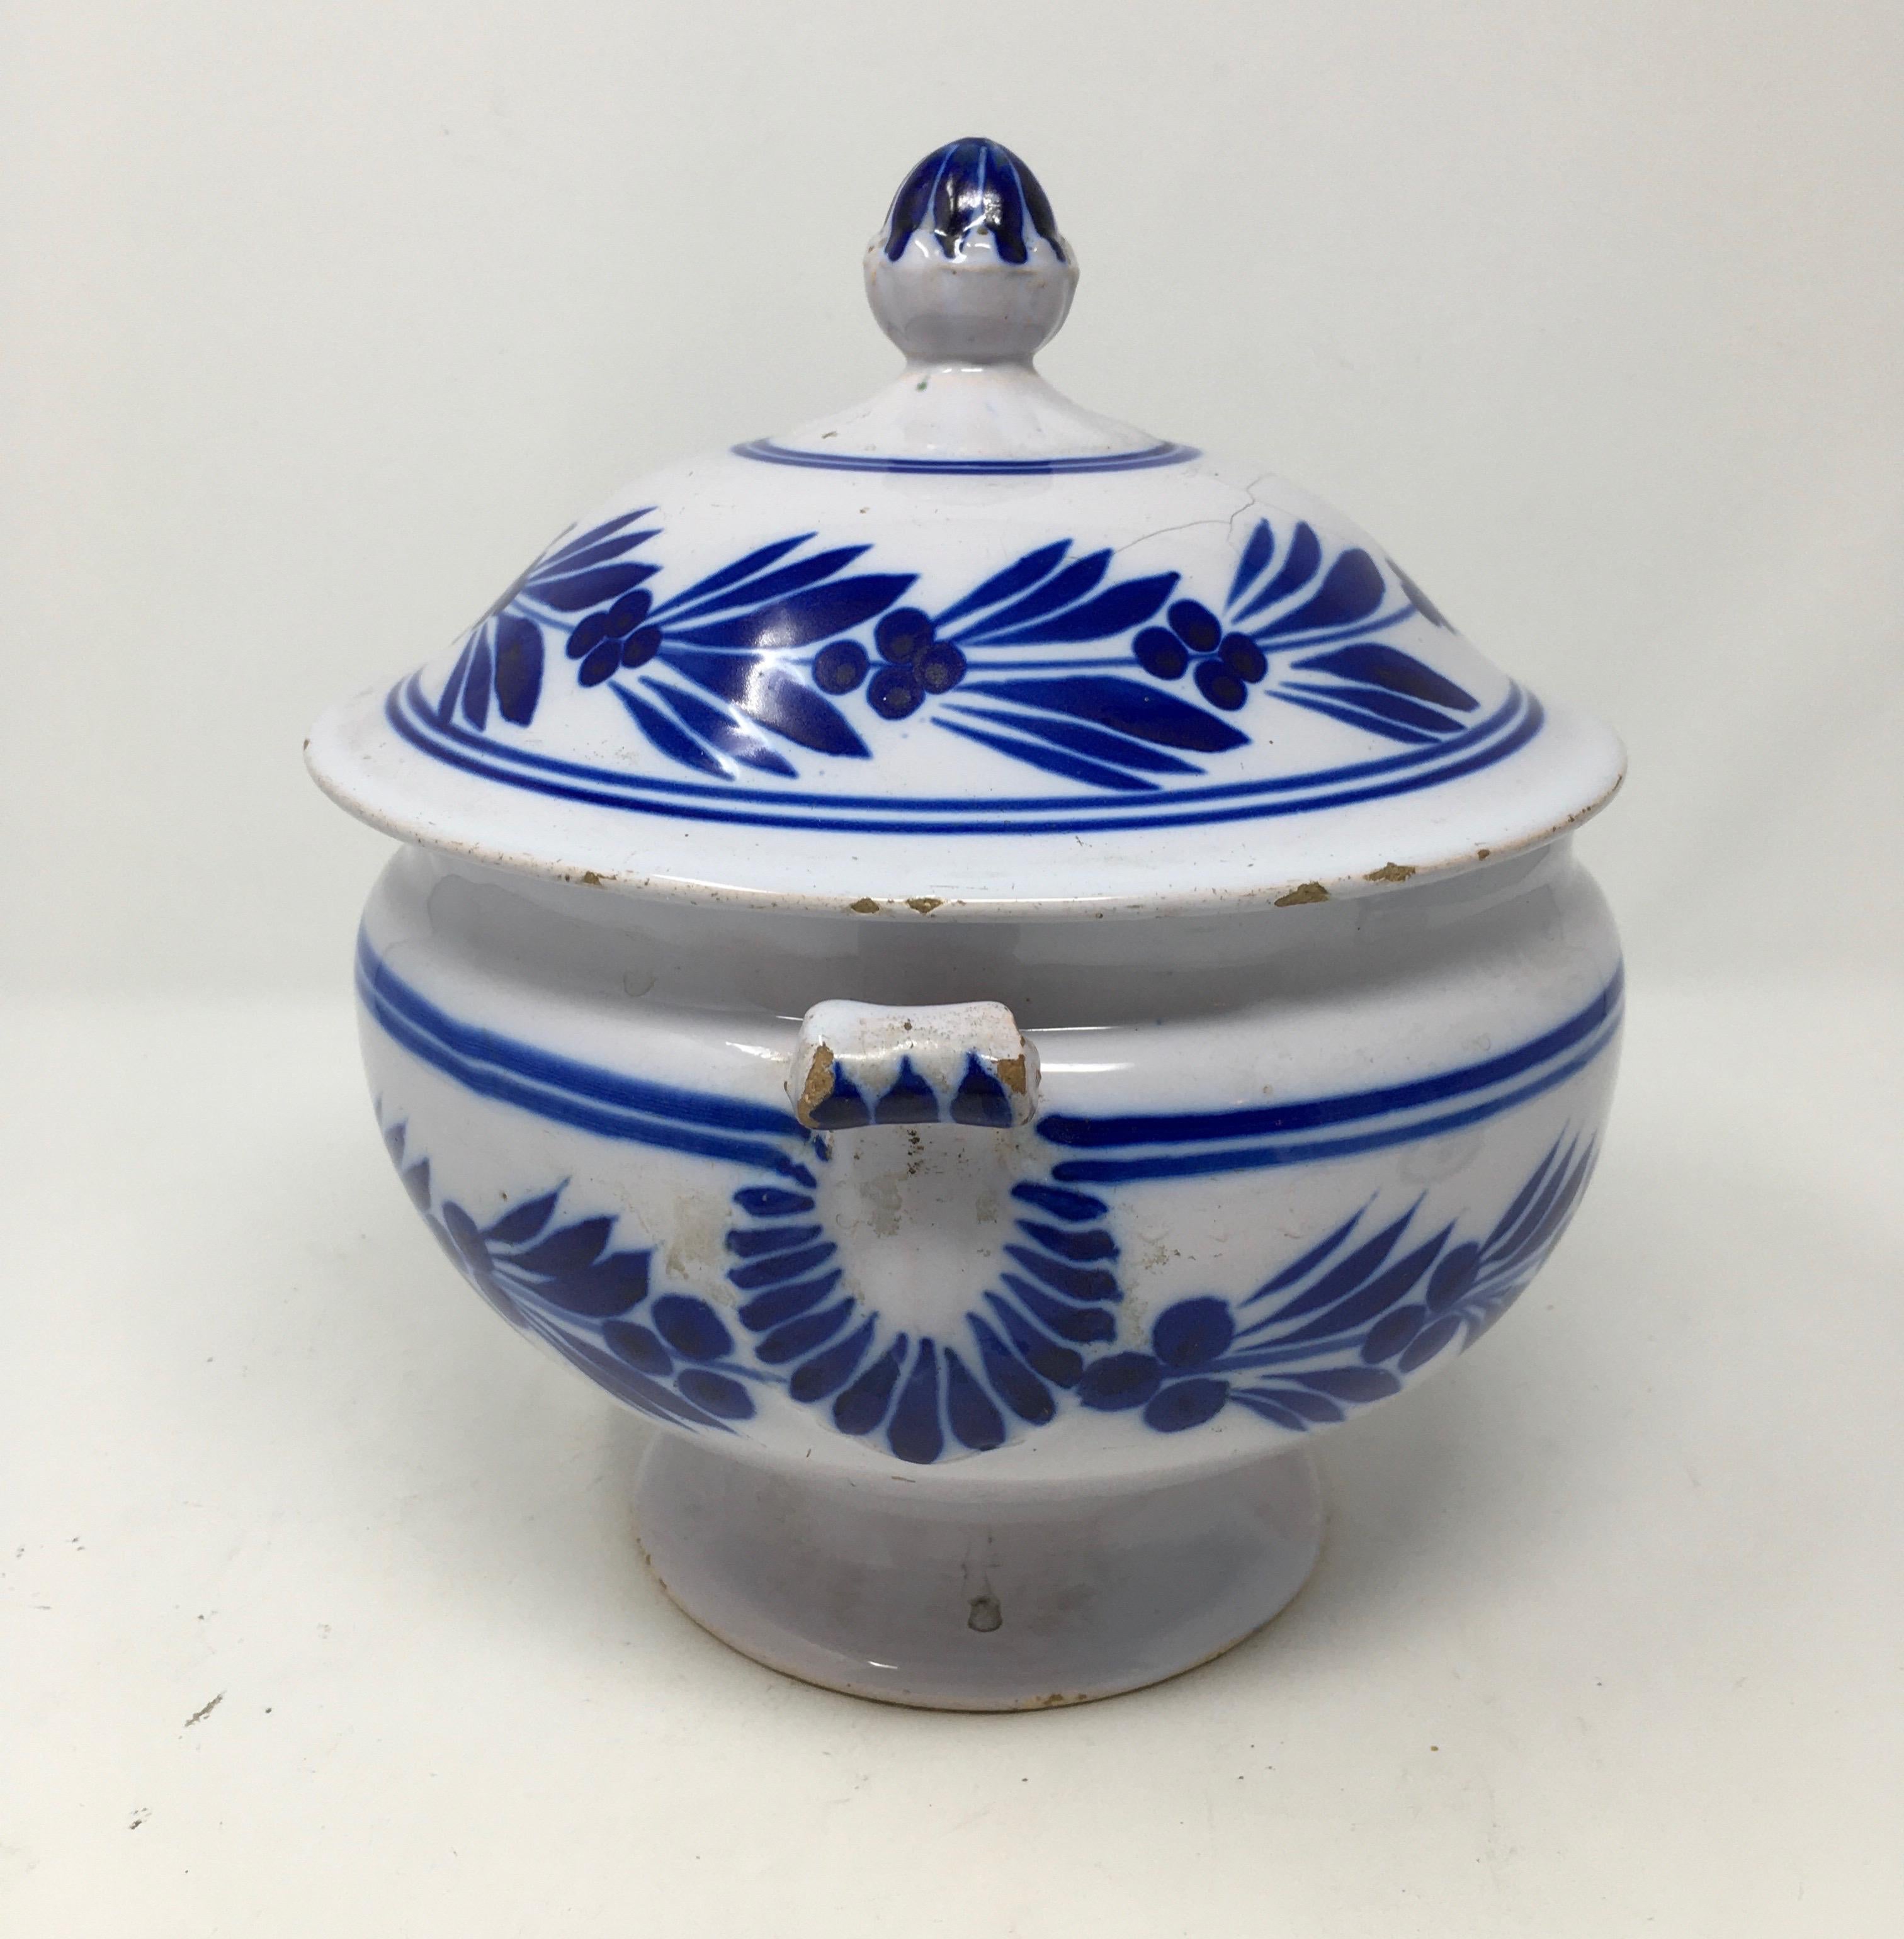 This hand painted Italian Deruta Pottery Tureen has a beautiful rich blue patina. It has suffered a few dings in its surface. However we do not believe that the detract from its beauty.